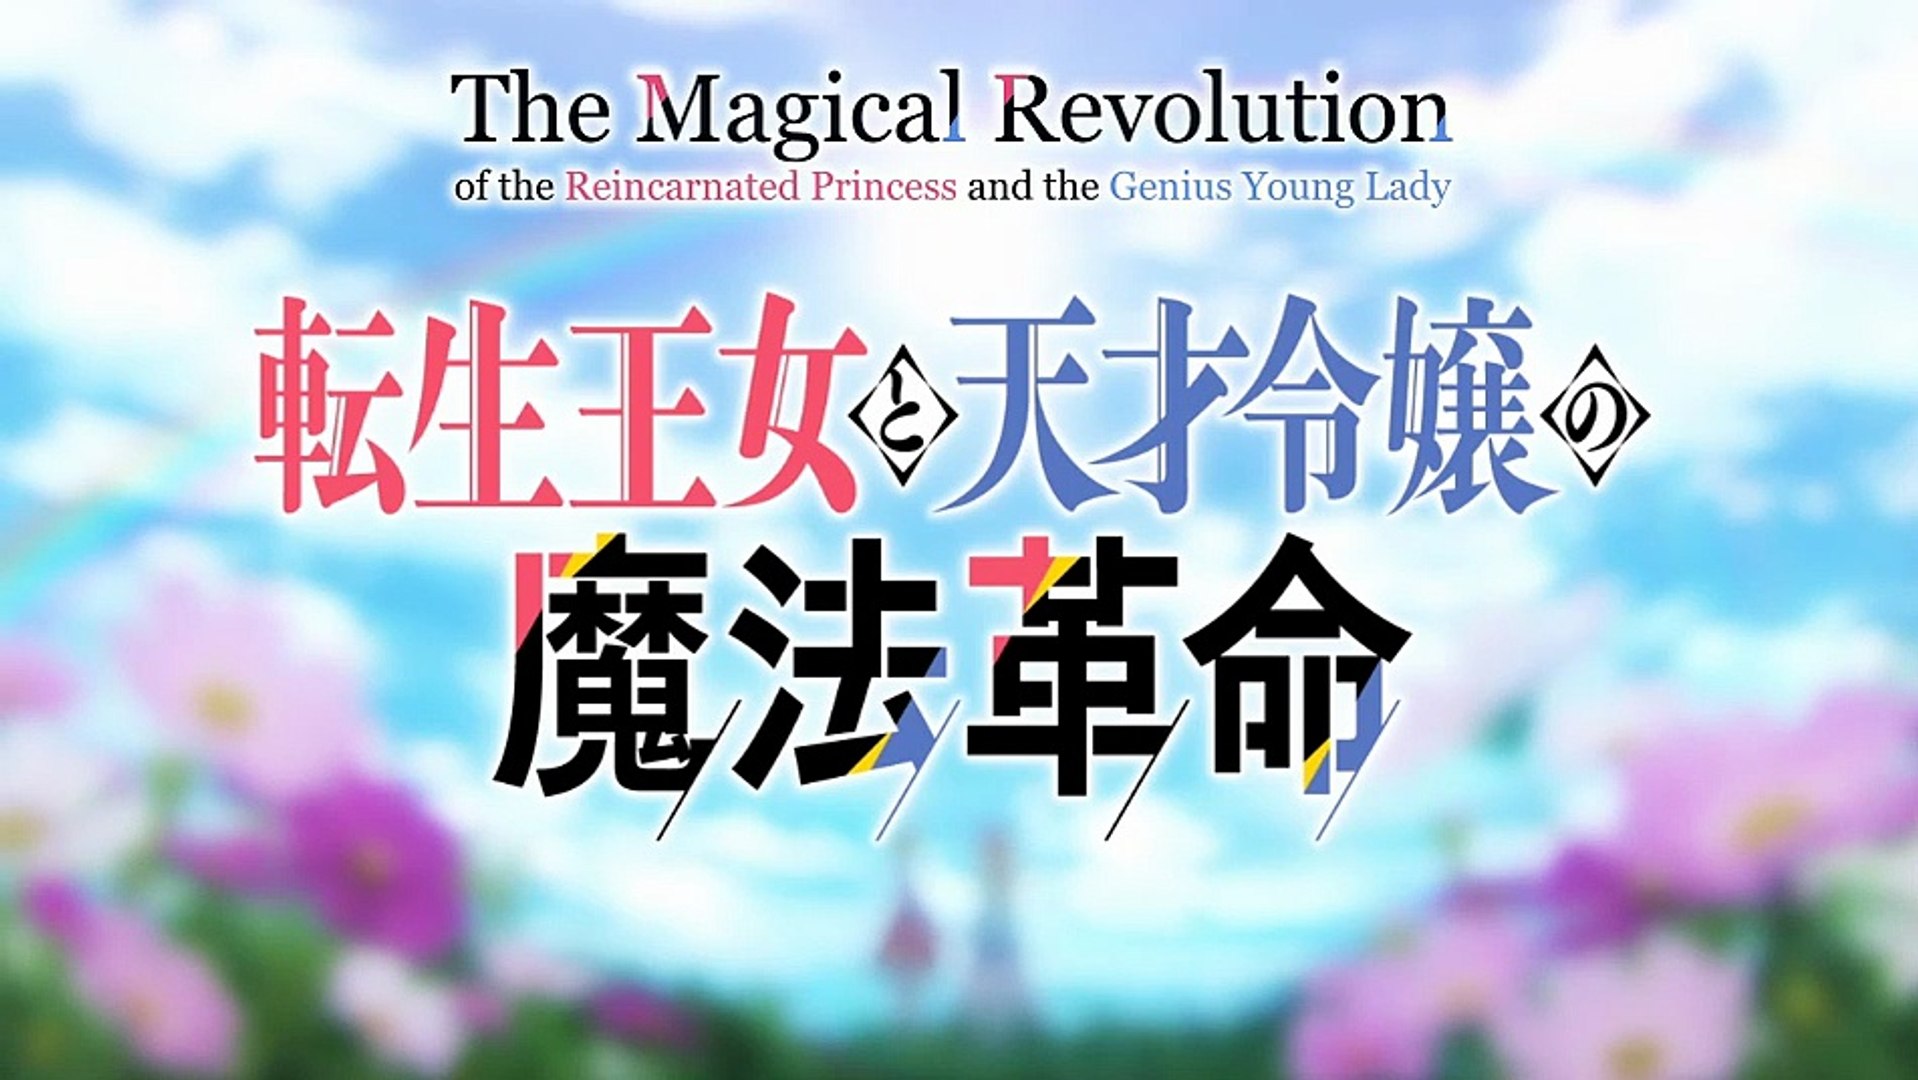 Episode 2  The Magical Revolution of the Reincarnated Princess